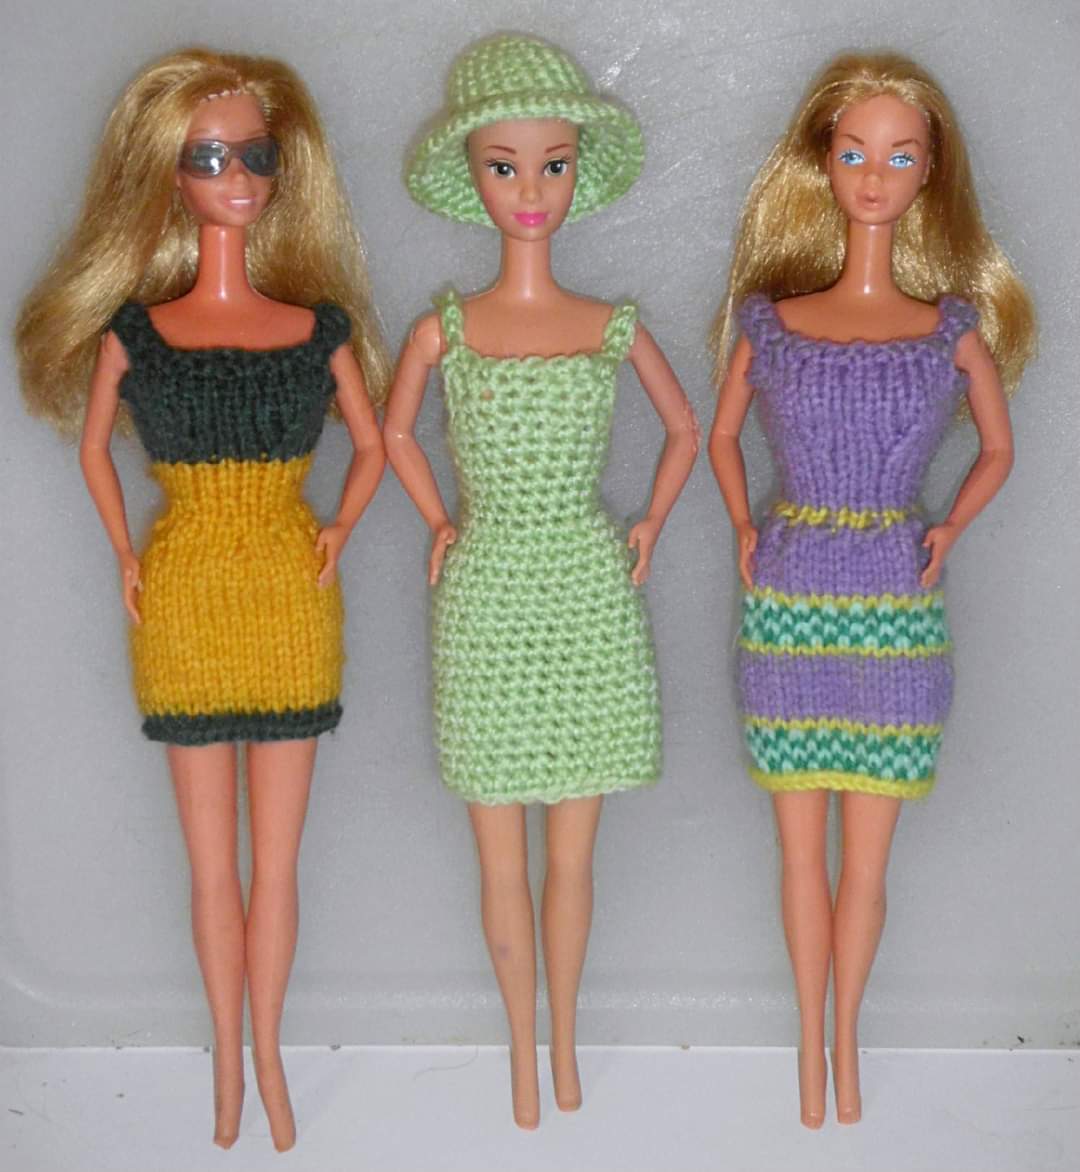 Ravelry: Barbie - Fashionista Barbie Clothes ~ Separates pattern